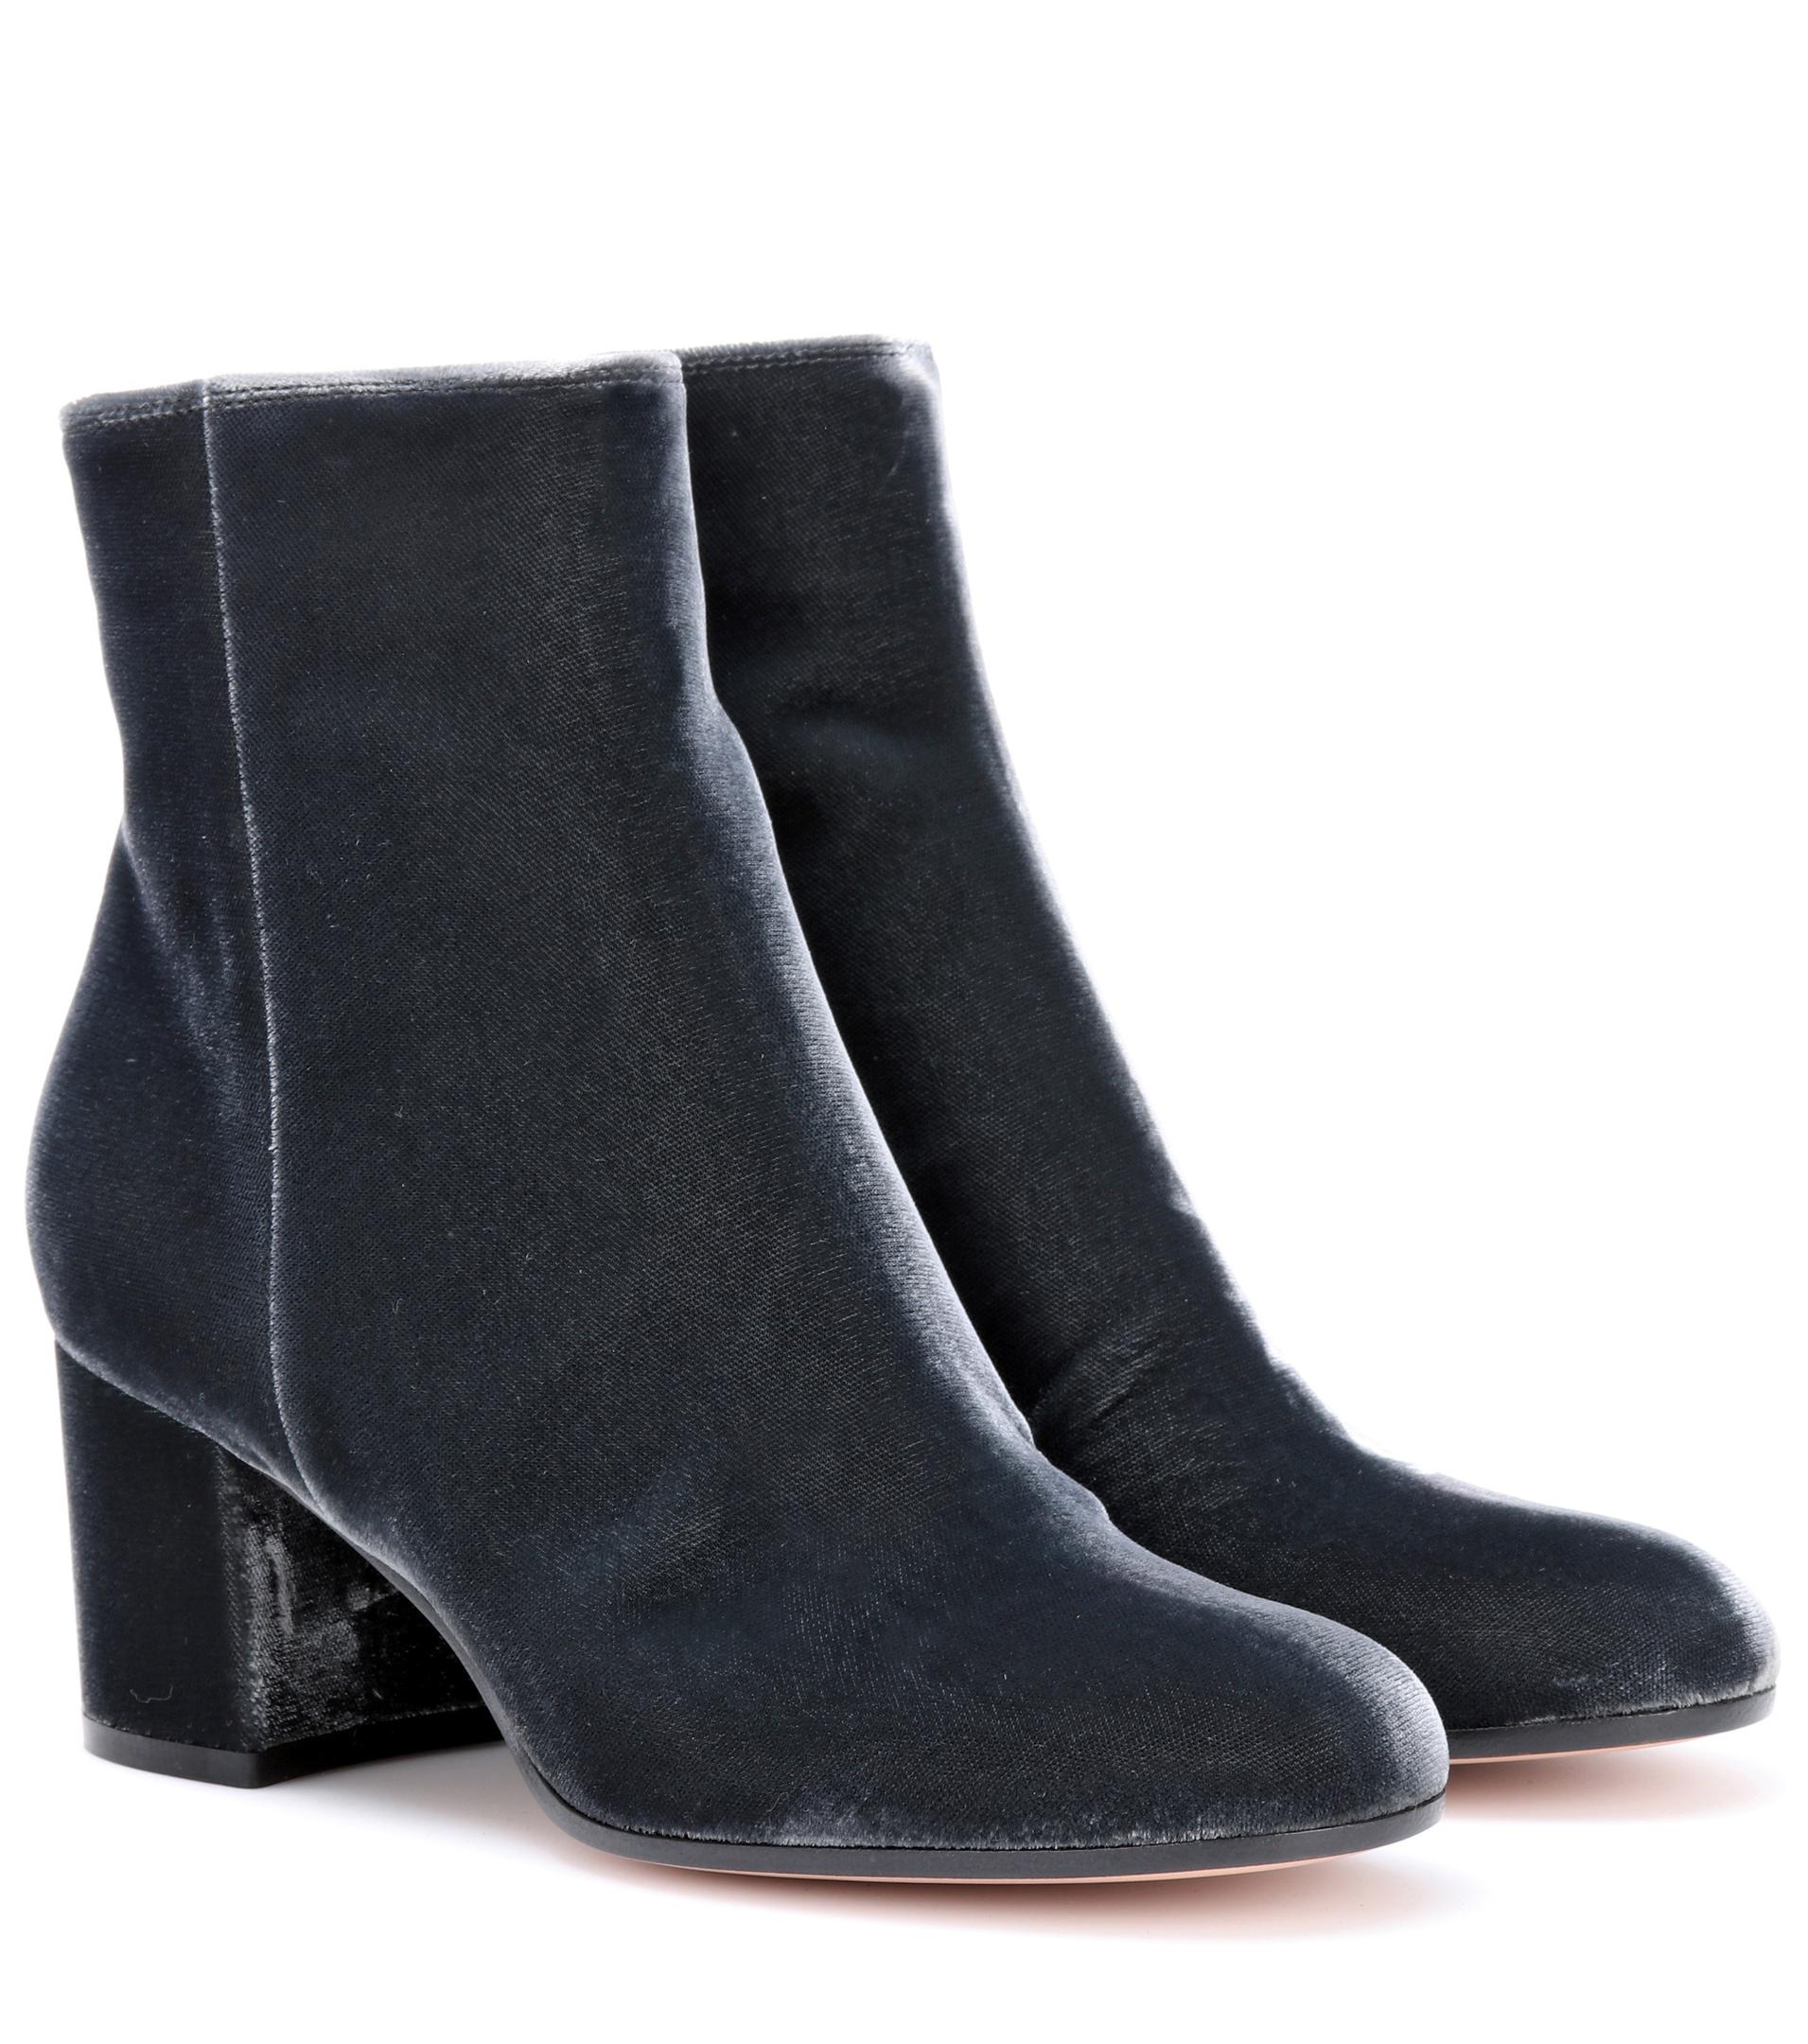 Gianvito Rossi Margaux Velvet Ankle Boots in Grey (Gray) - Lyst